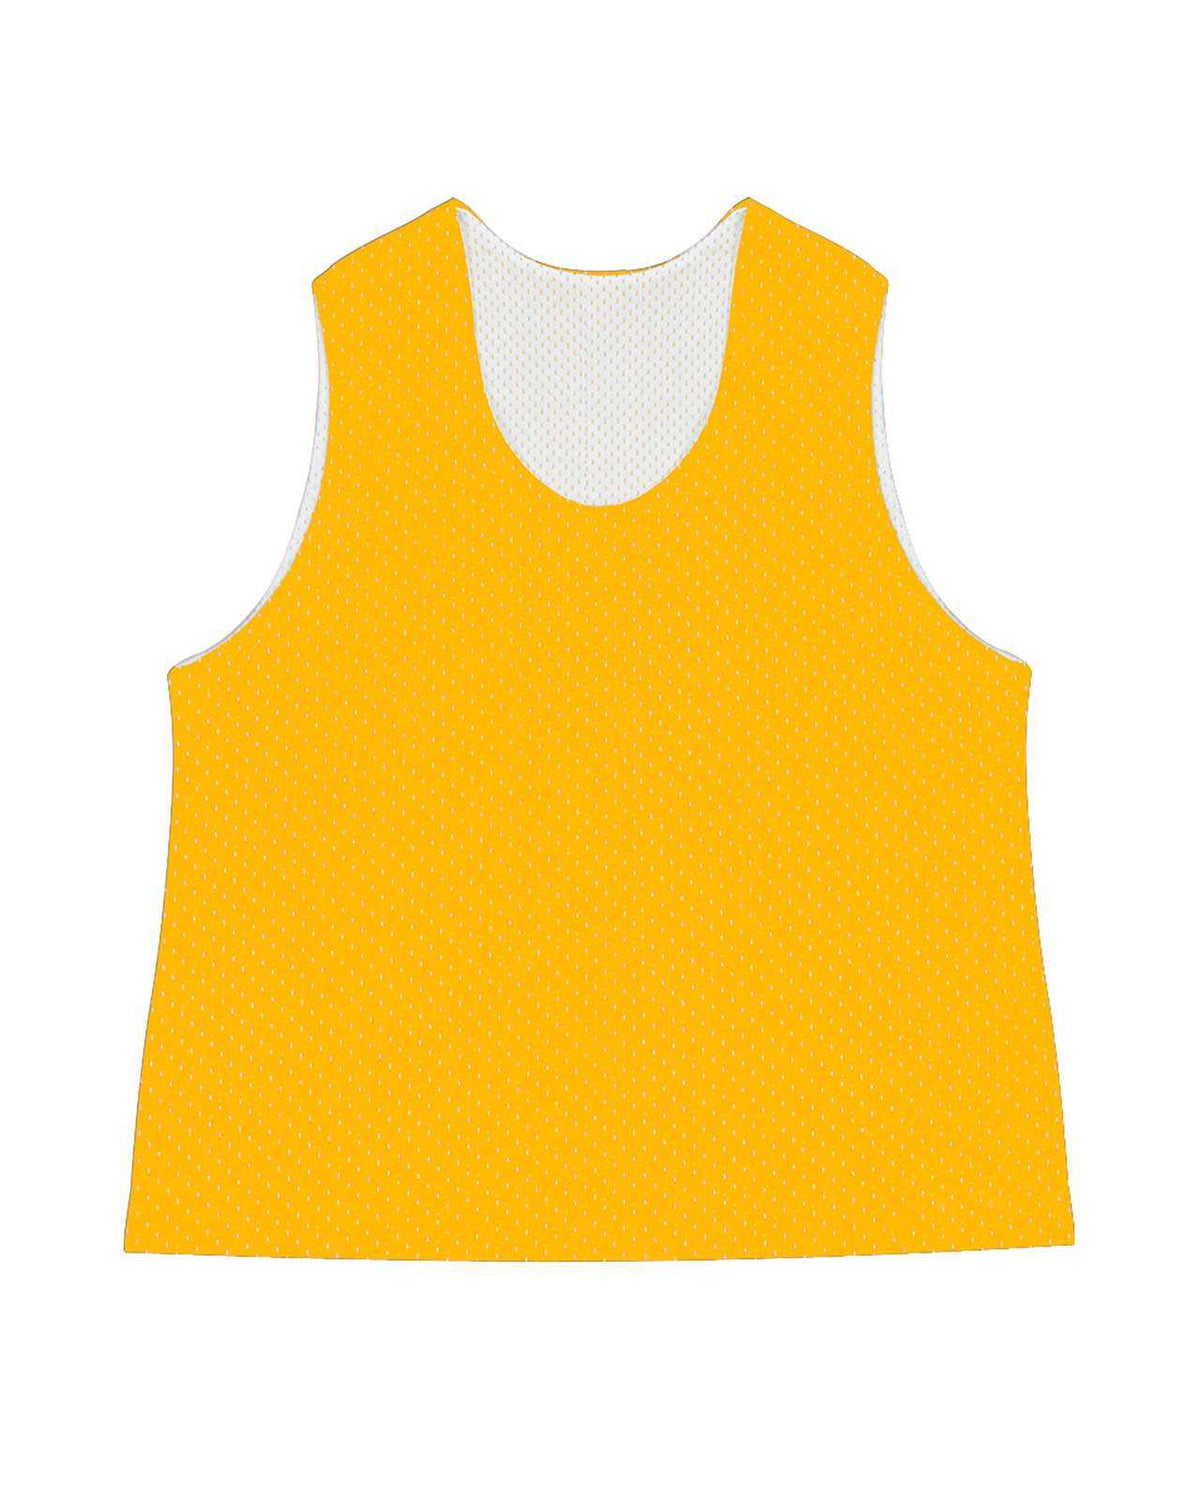 C2 Sport 5260 Mesh Reversible Youth Pinnie - Gold White - HIT a Double - 1